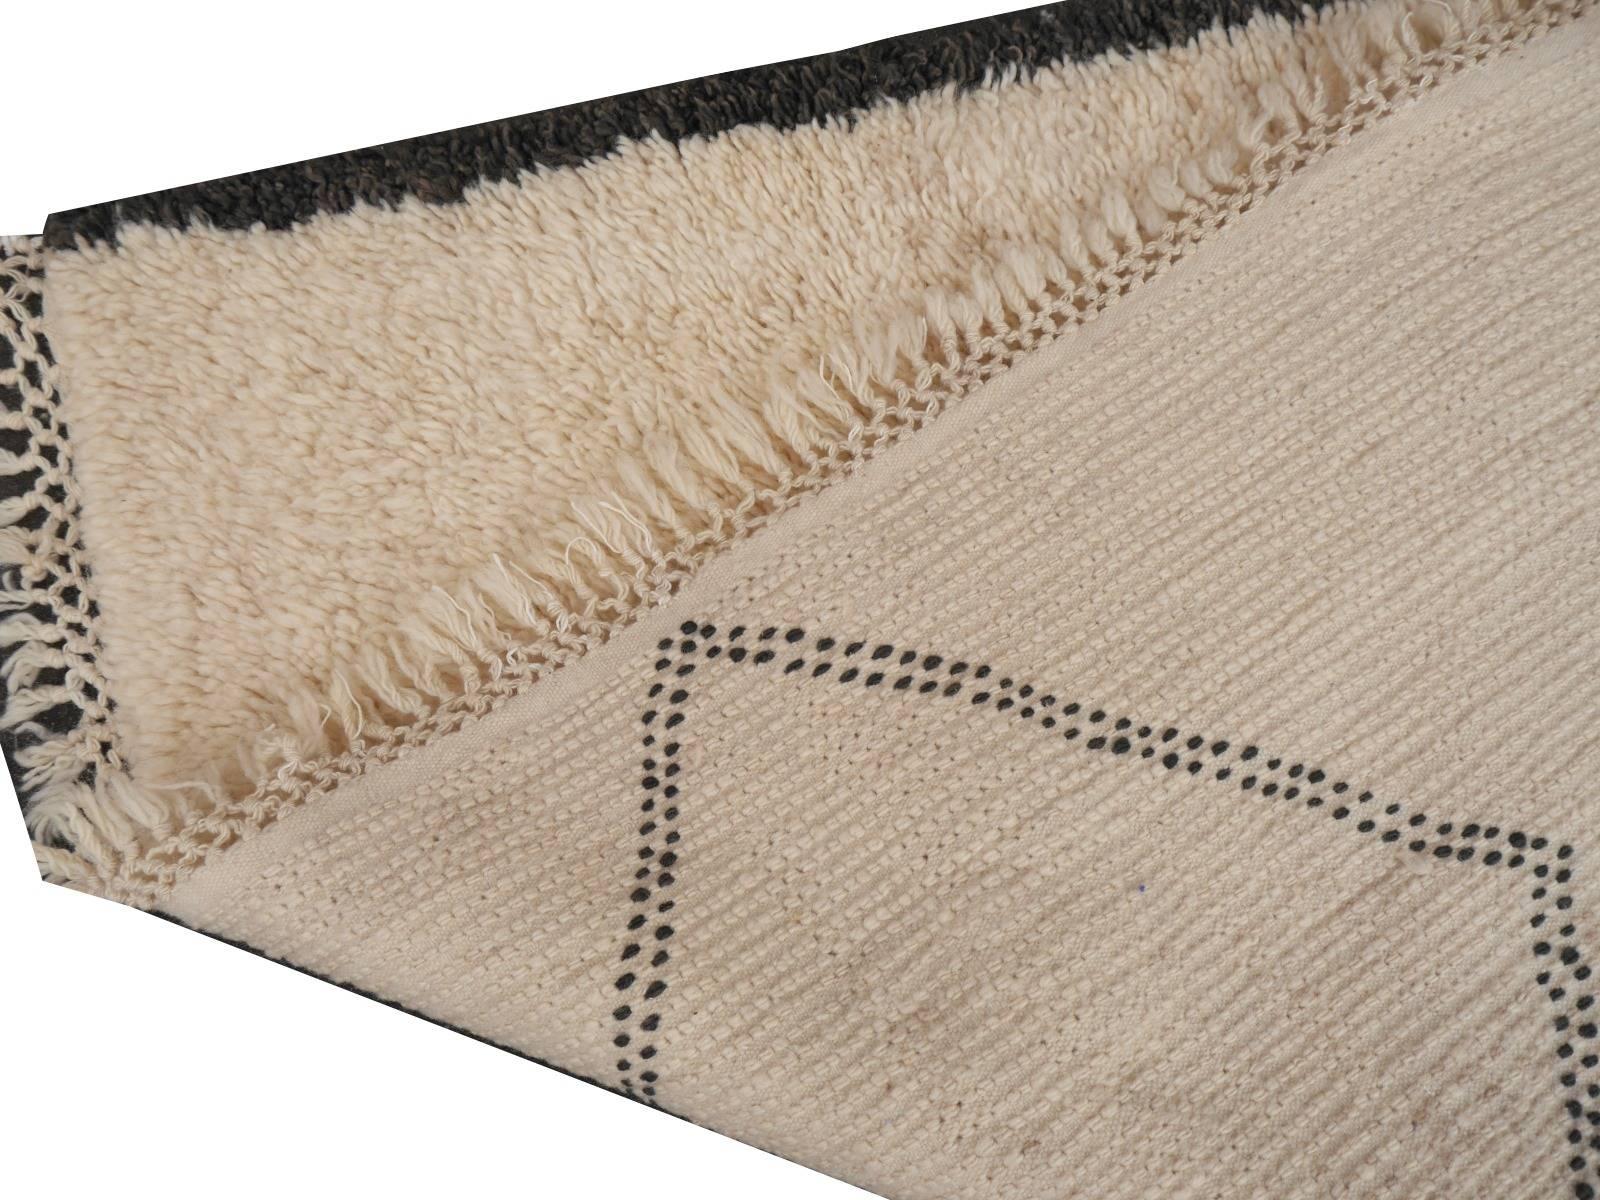 Contemporary North African Moroccan Berber Rug Ivory and Dark Brown 2